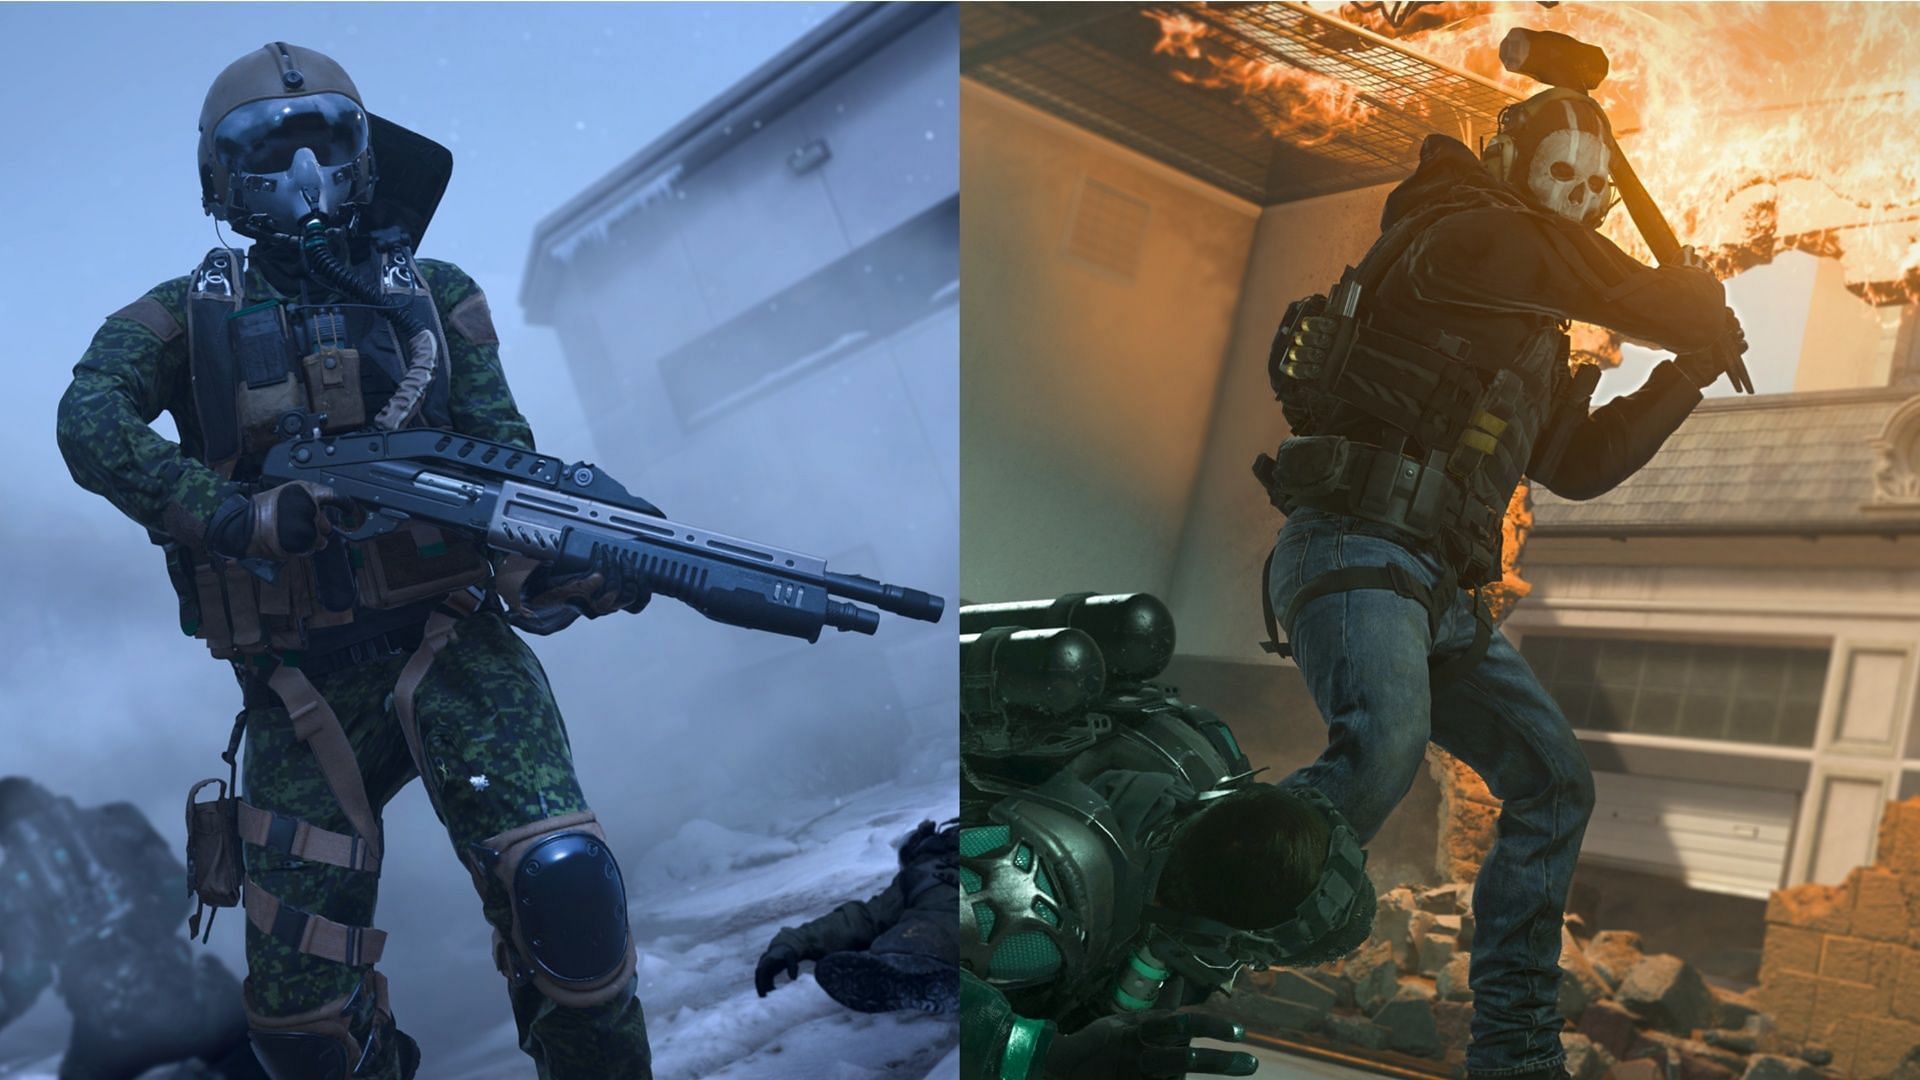 An Operator holding the Reclaimer 18 shotgun on the left and an Operator holding the Sledgehammer on the right in Modern Warfare 3 and Warzone